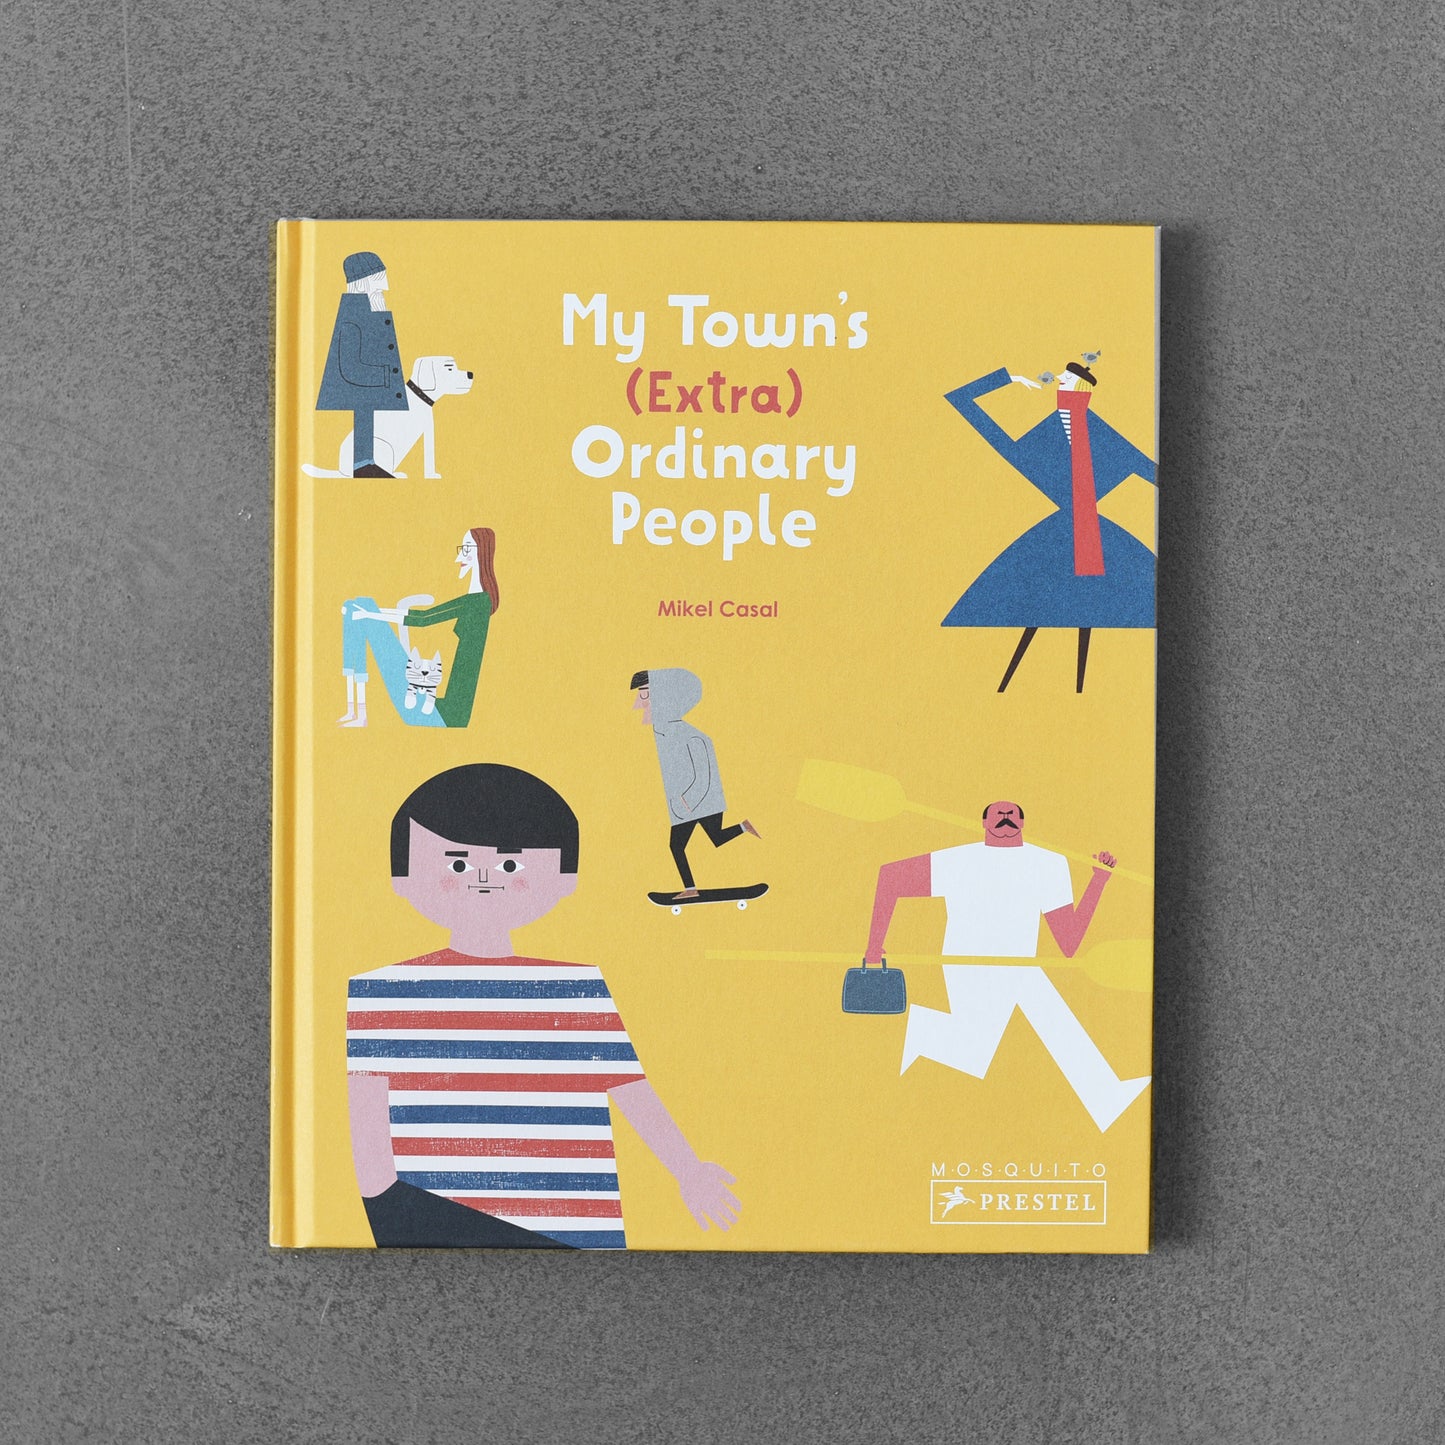 My Town’s (Extra) Ordinary People - Mikel Casal